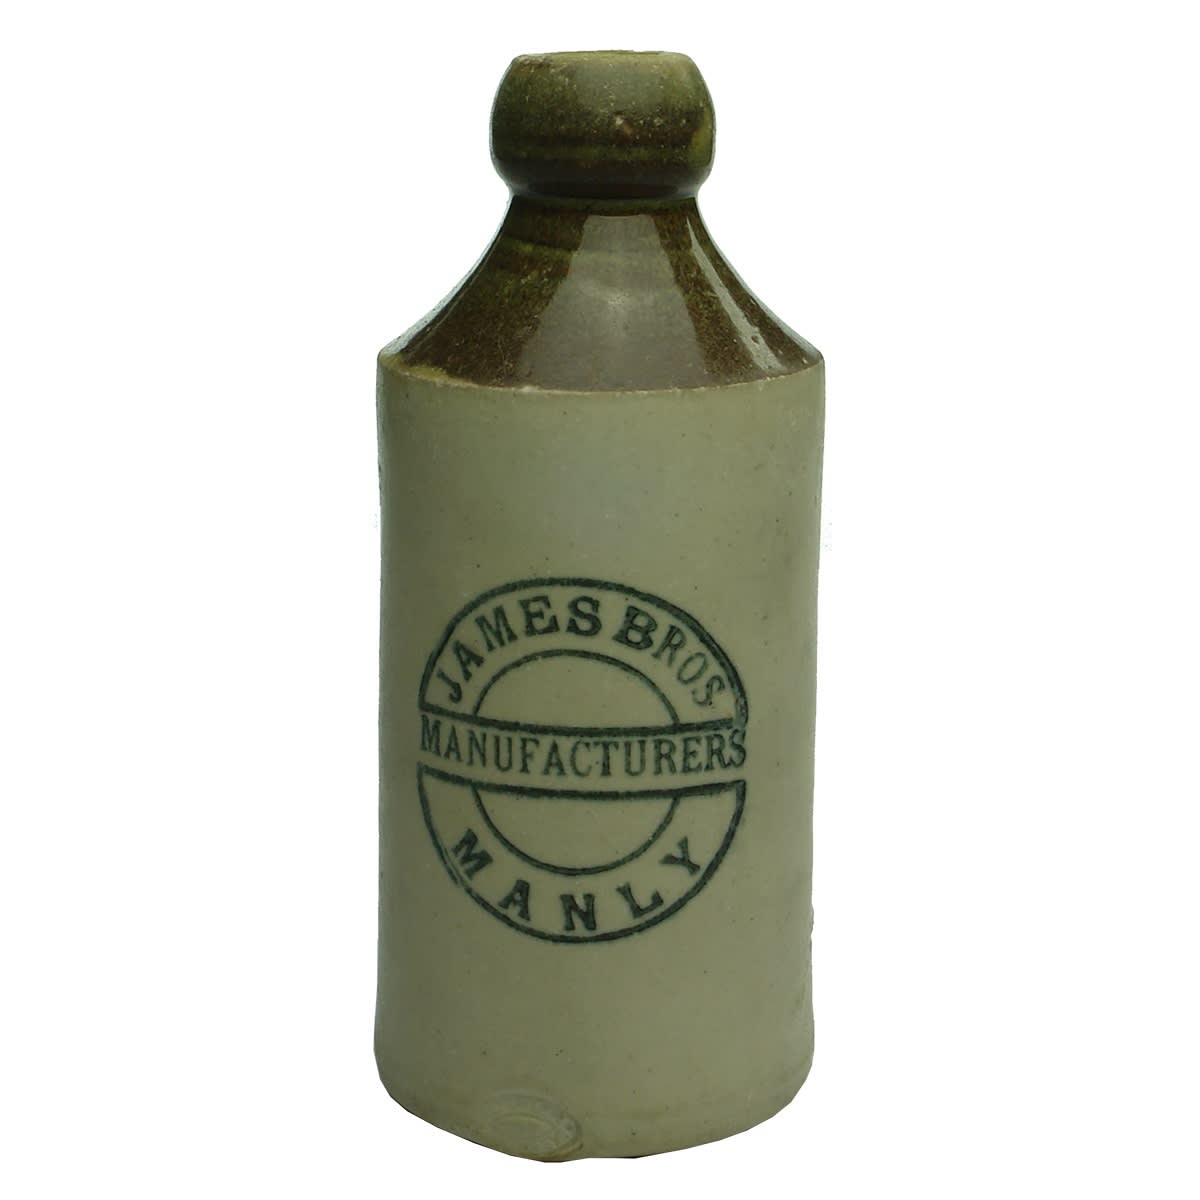 Ginger Beer. James Bros., Manufacturers, Manly. R. Fowler. Brown & Green Top. (New South Wales)